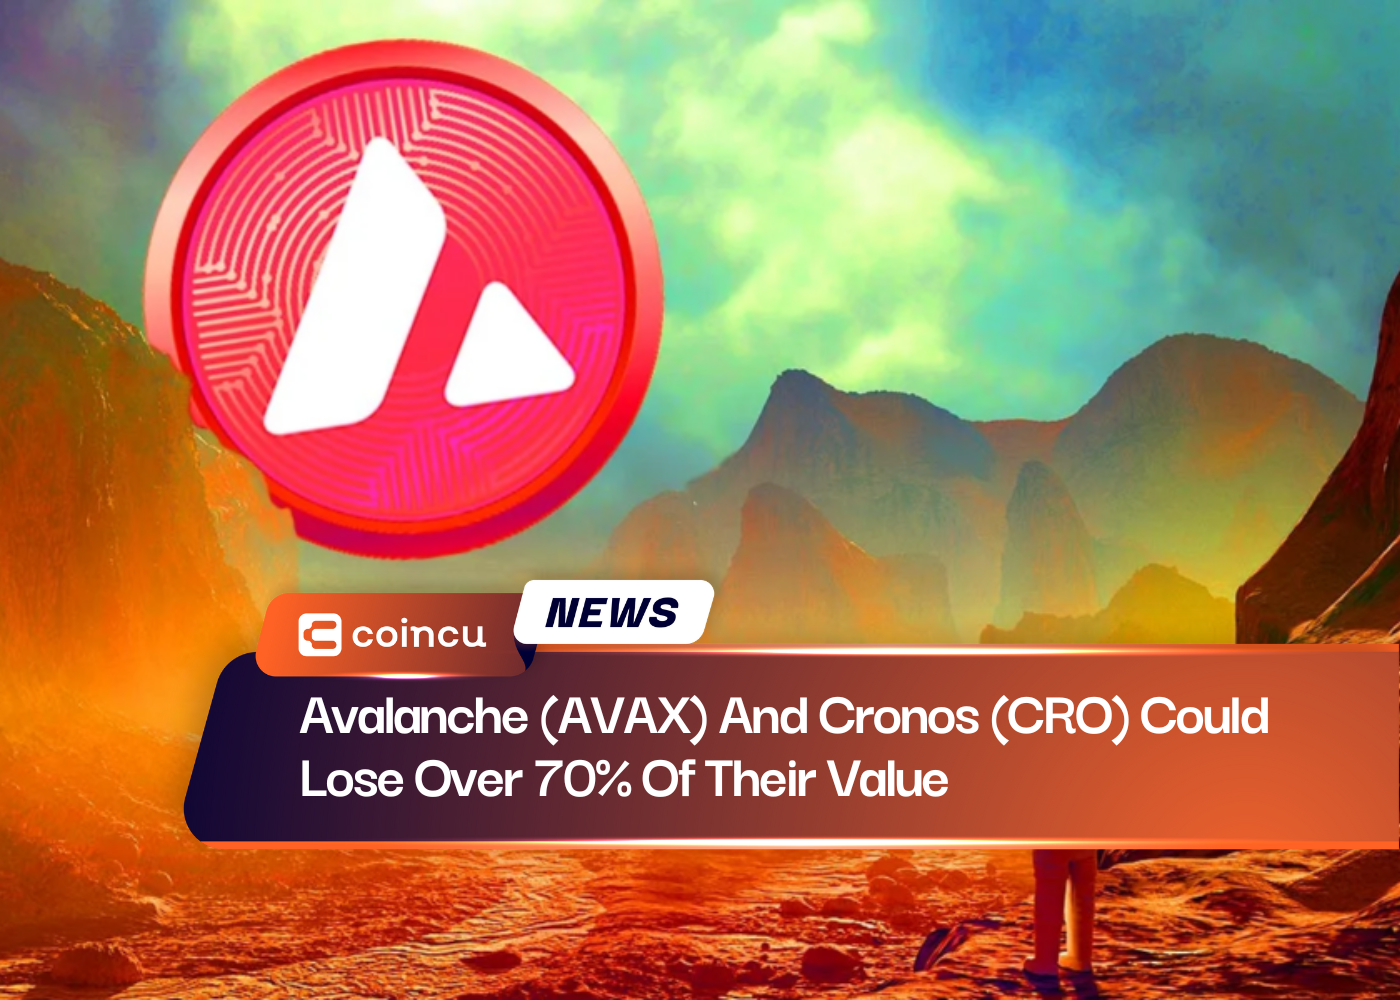 Avalanche (AVAX) And Cronos (CRO) Could Lose Over 70% Of Their Value